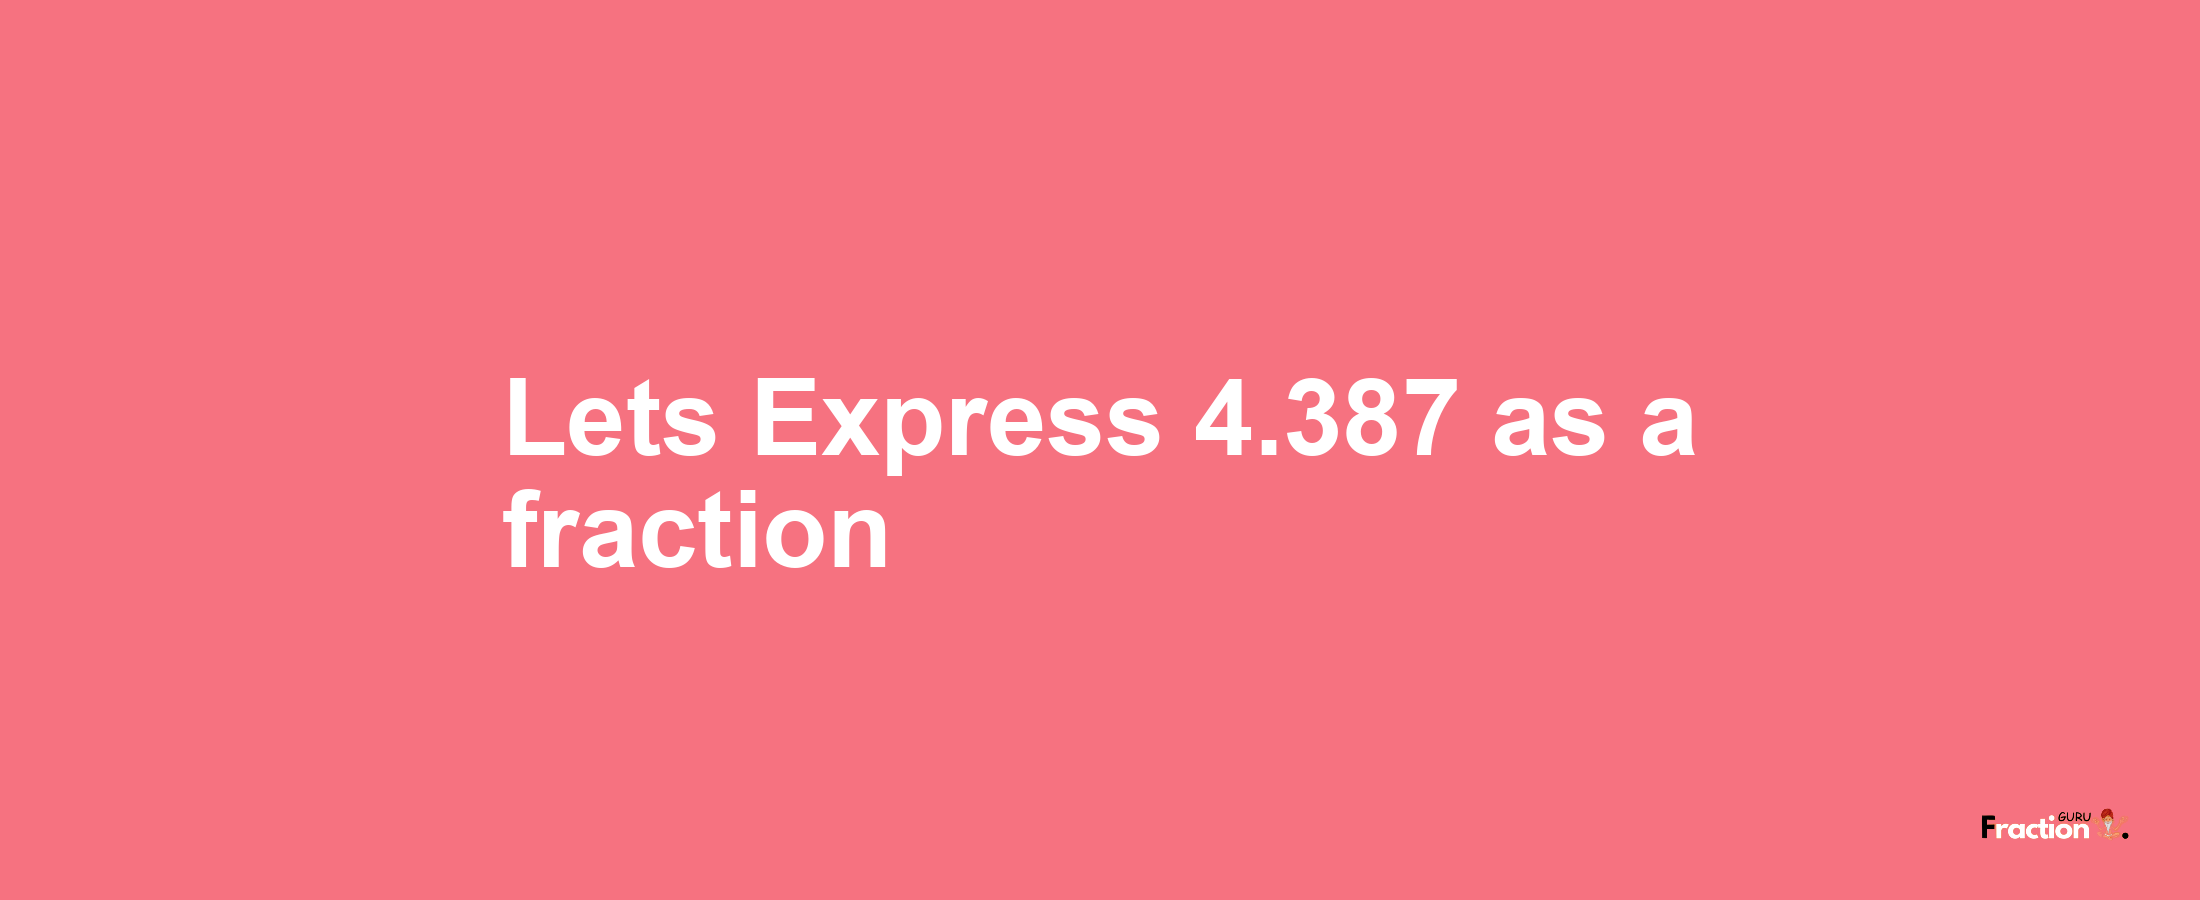 Lets Express 4.387 as afraction